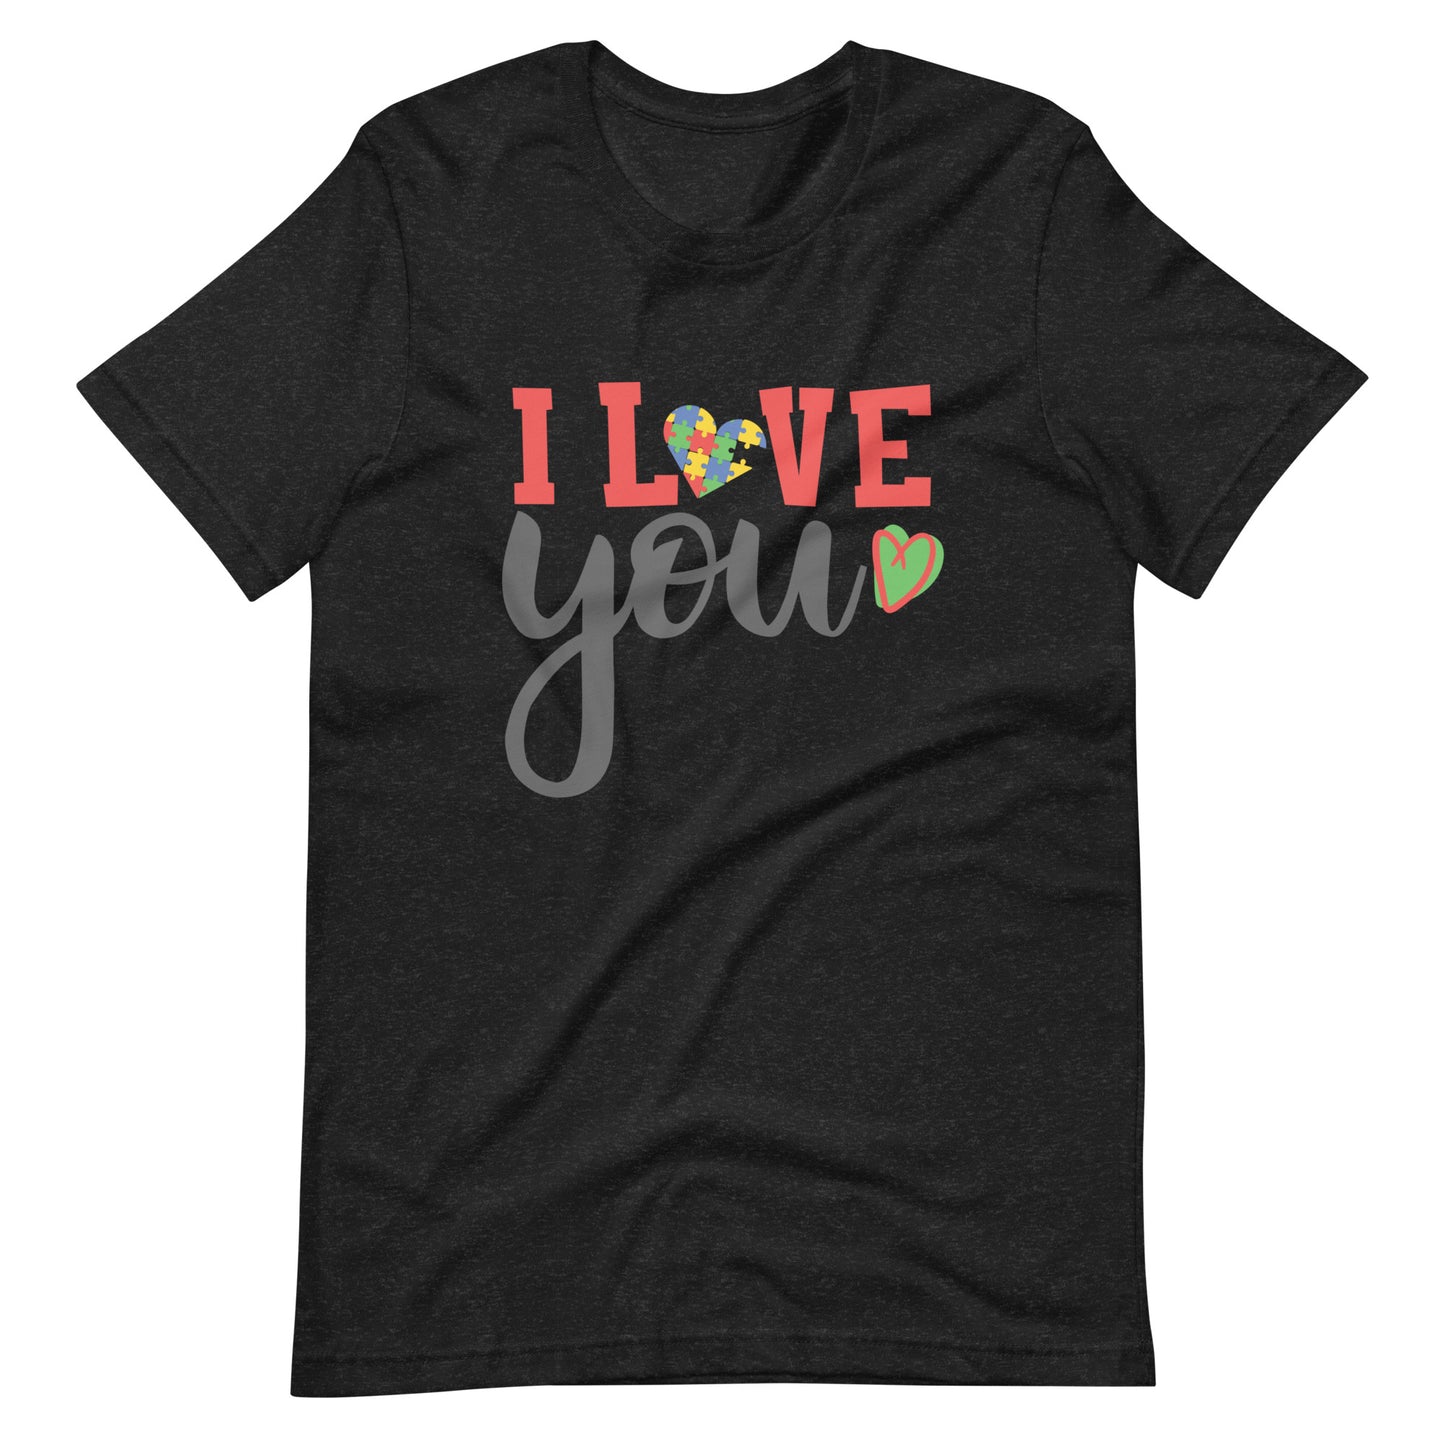 I love you unisex t-shirt The Workout Inspiration